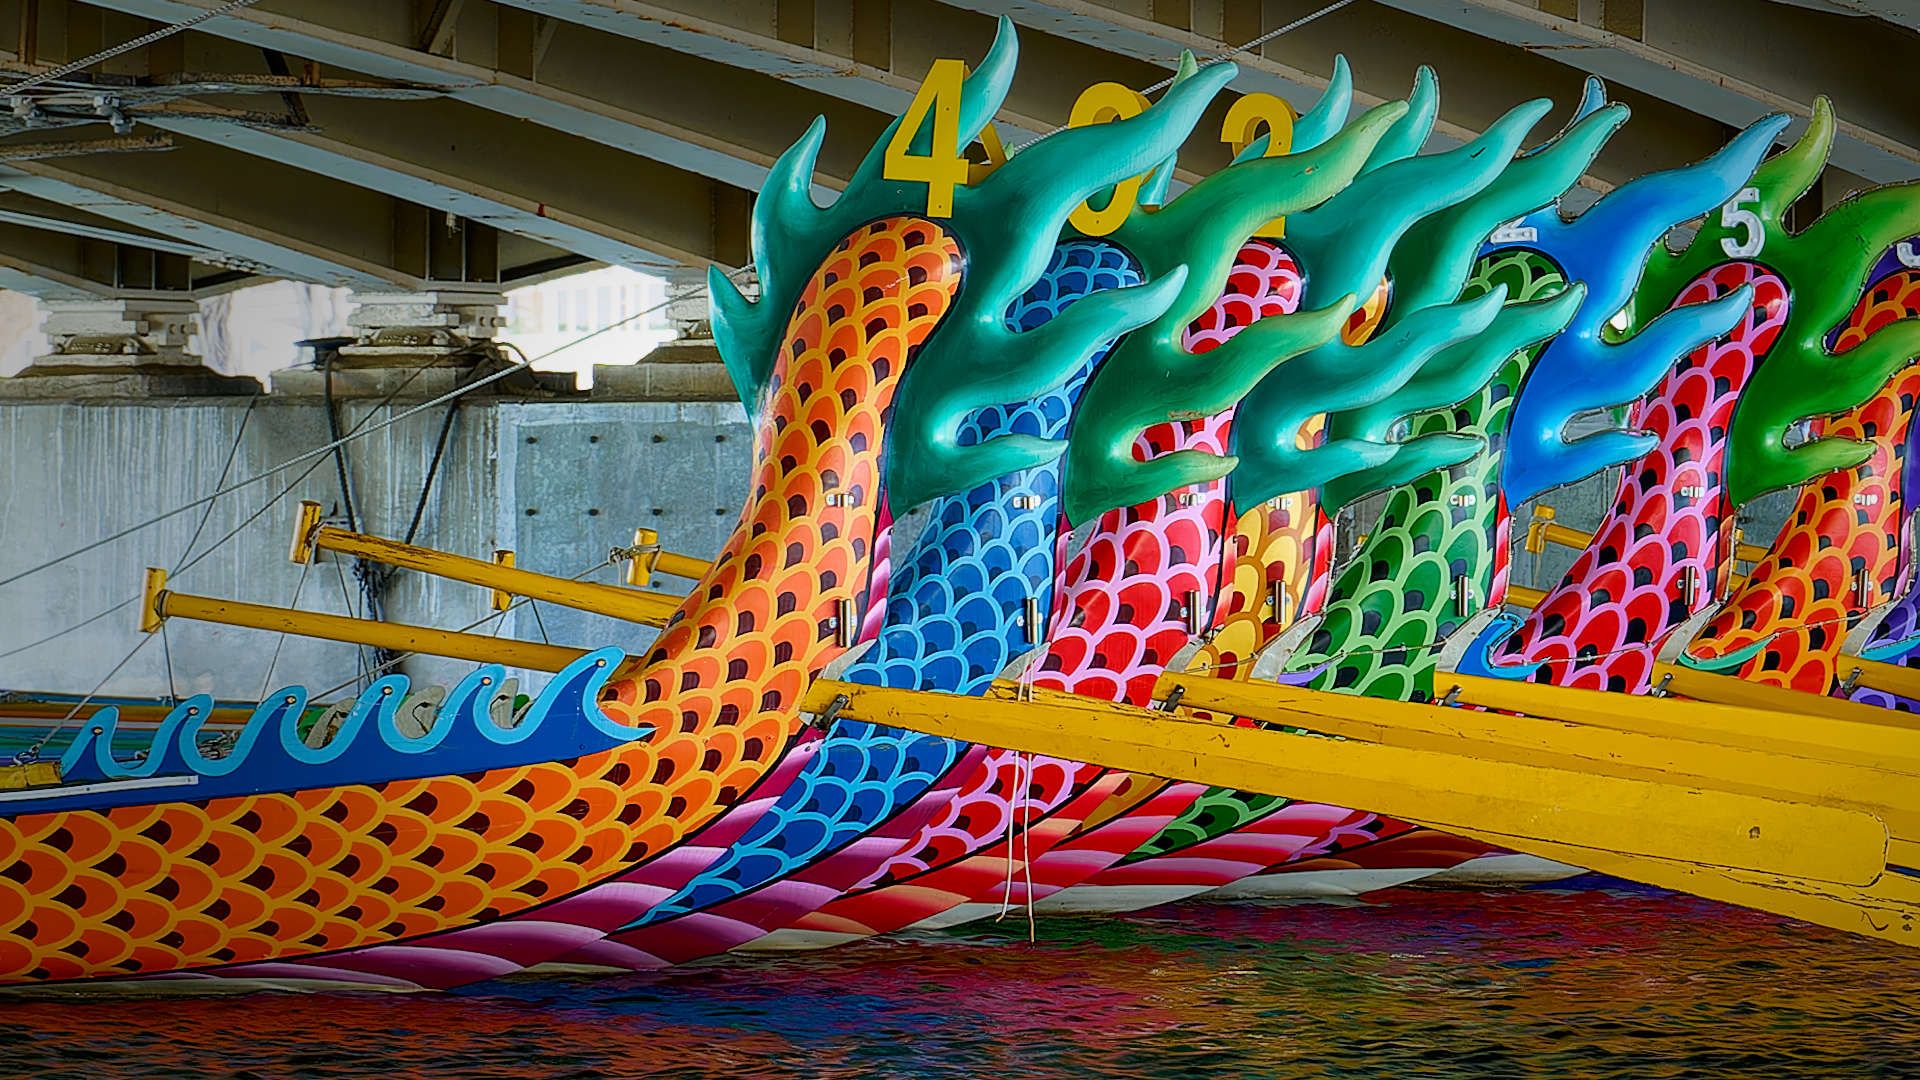 The tails of approximately 10 dragon boats moored under a bridge.